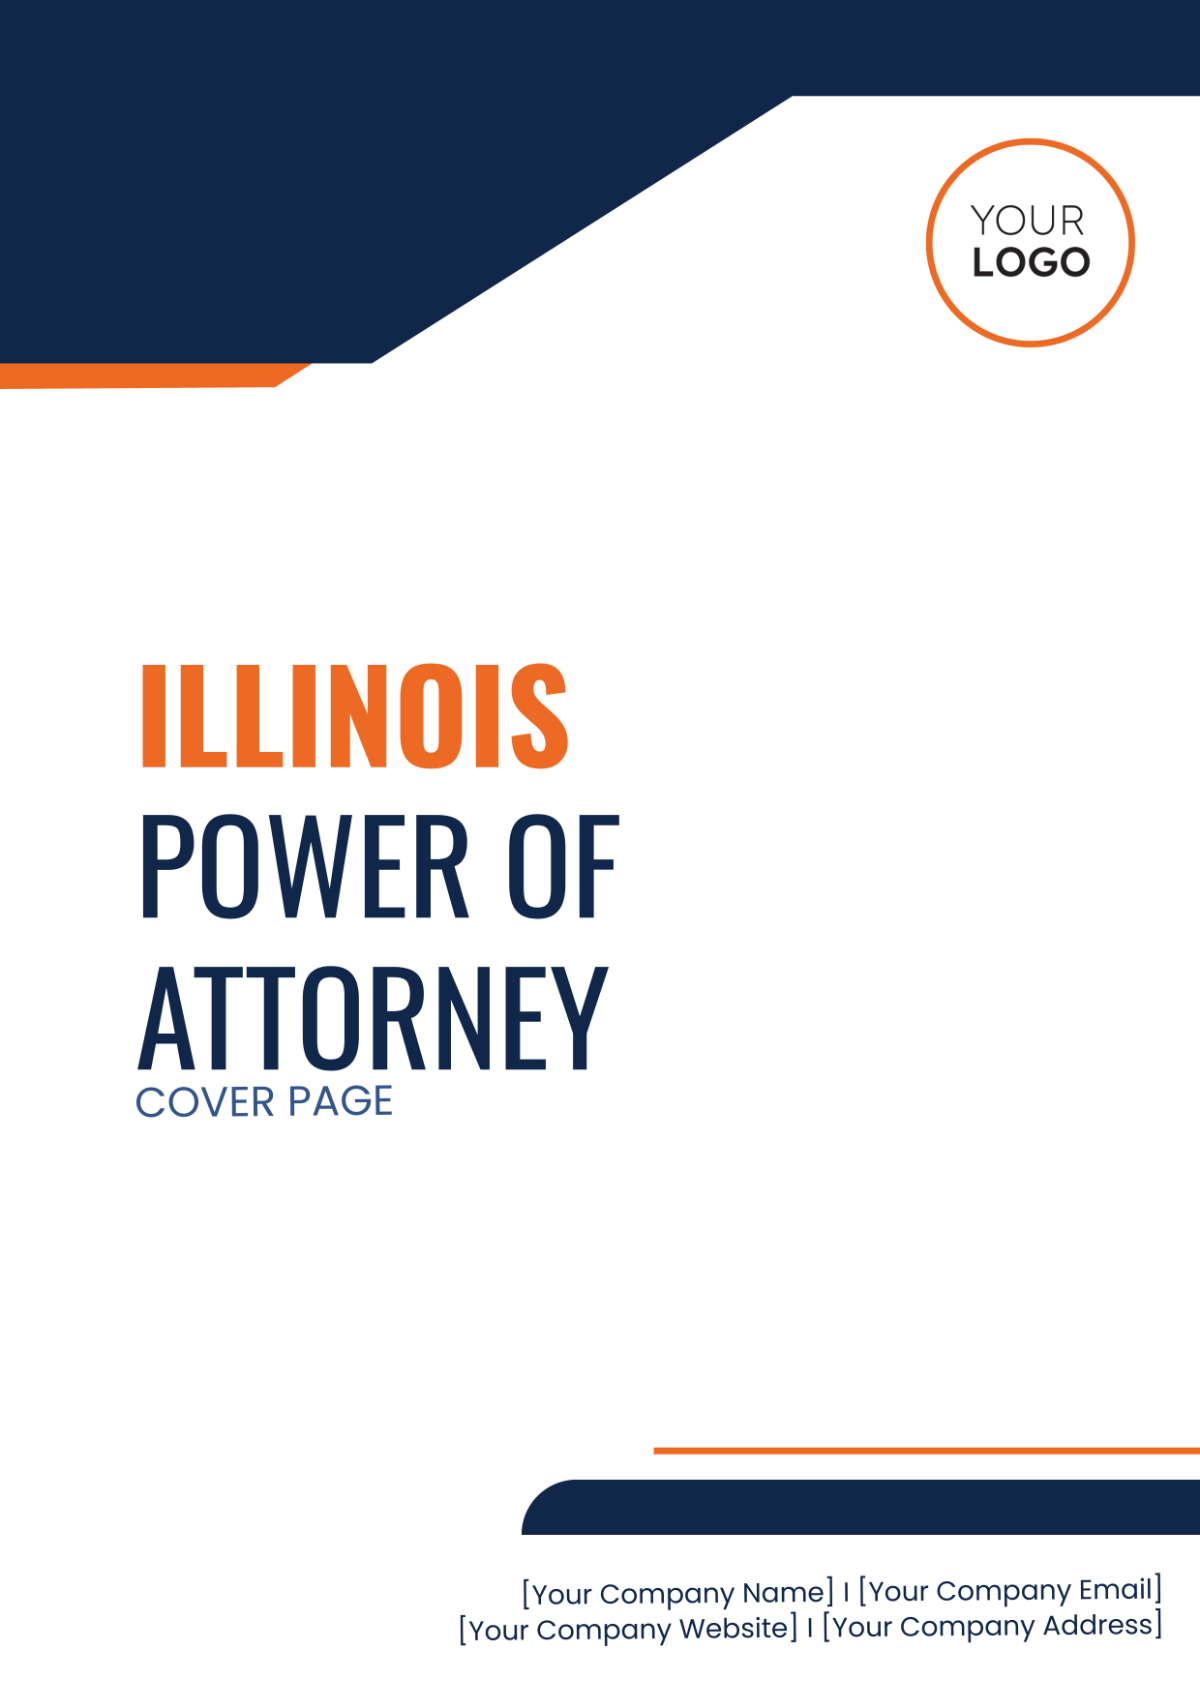 Illinois Power of Attorney Cover Page